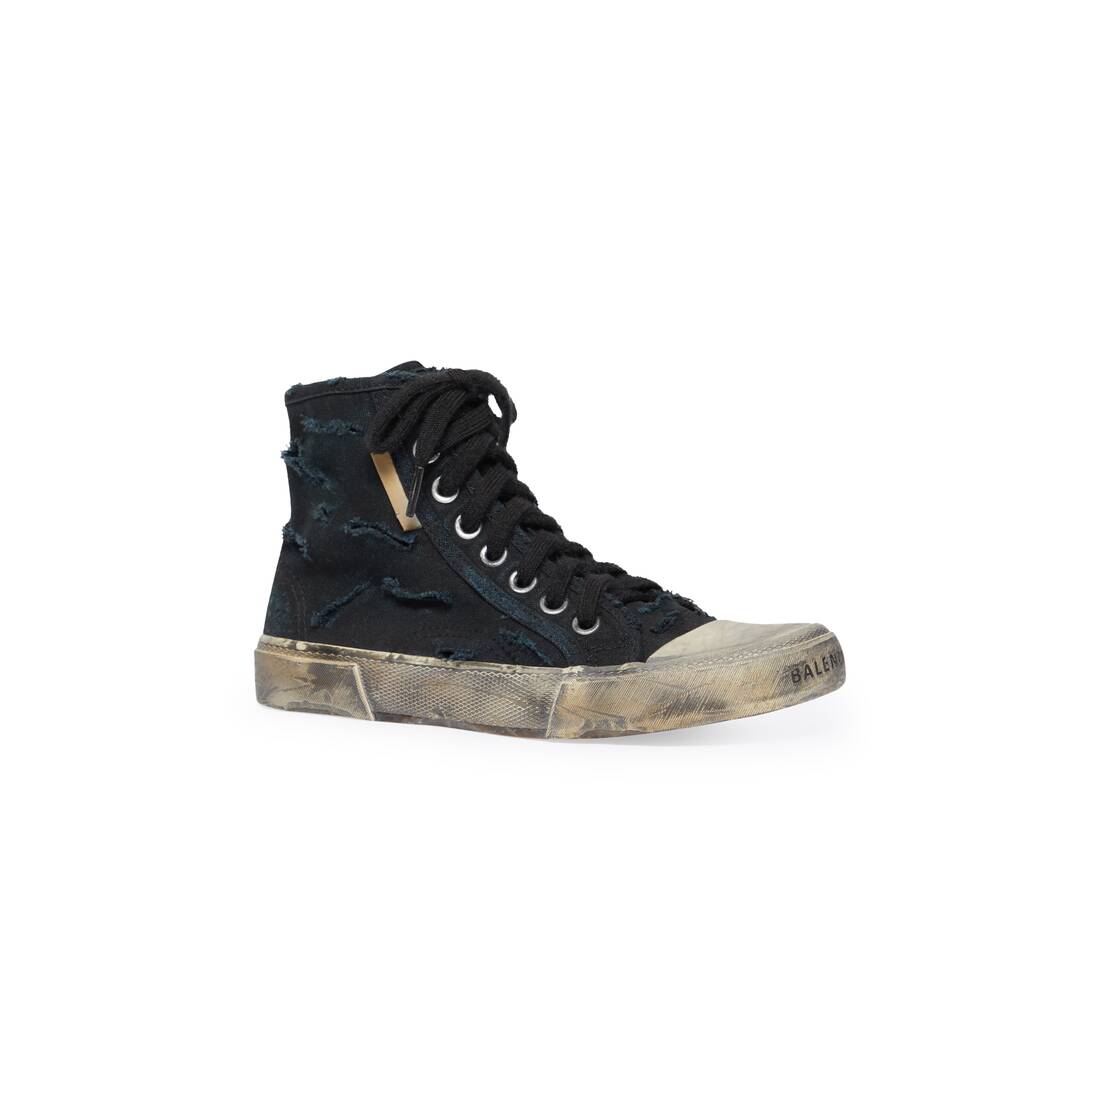 limited edition – paris high top sneaker full destroyed